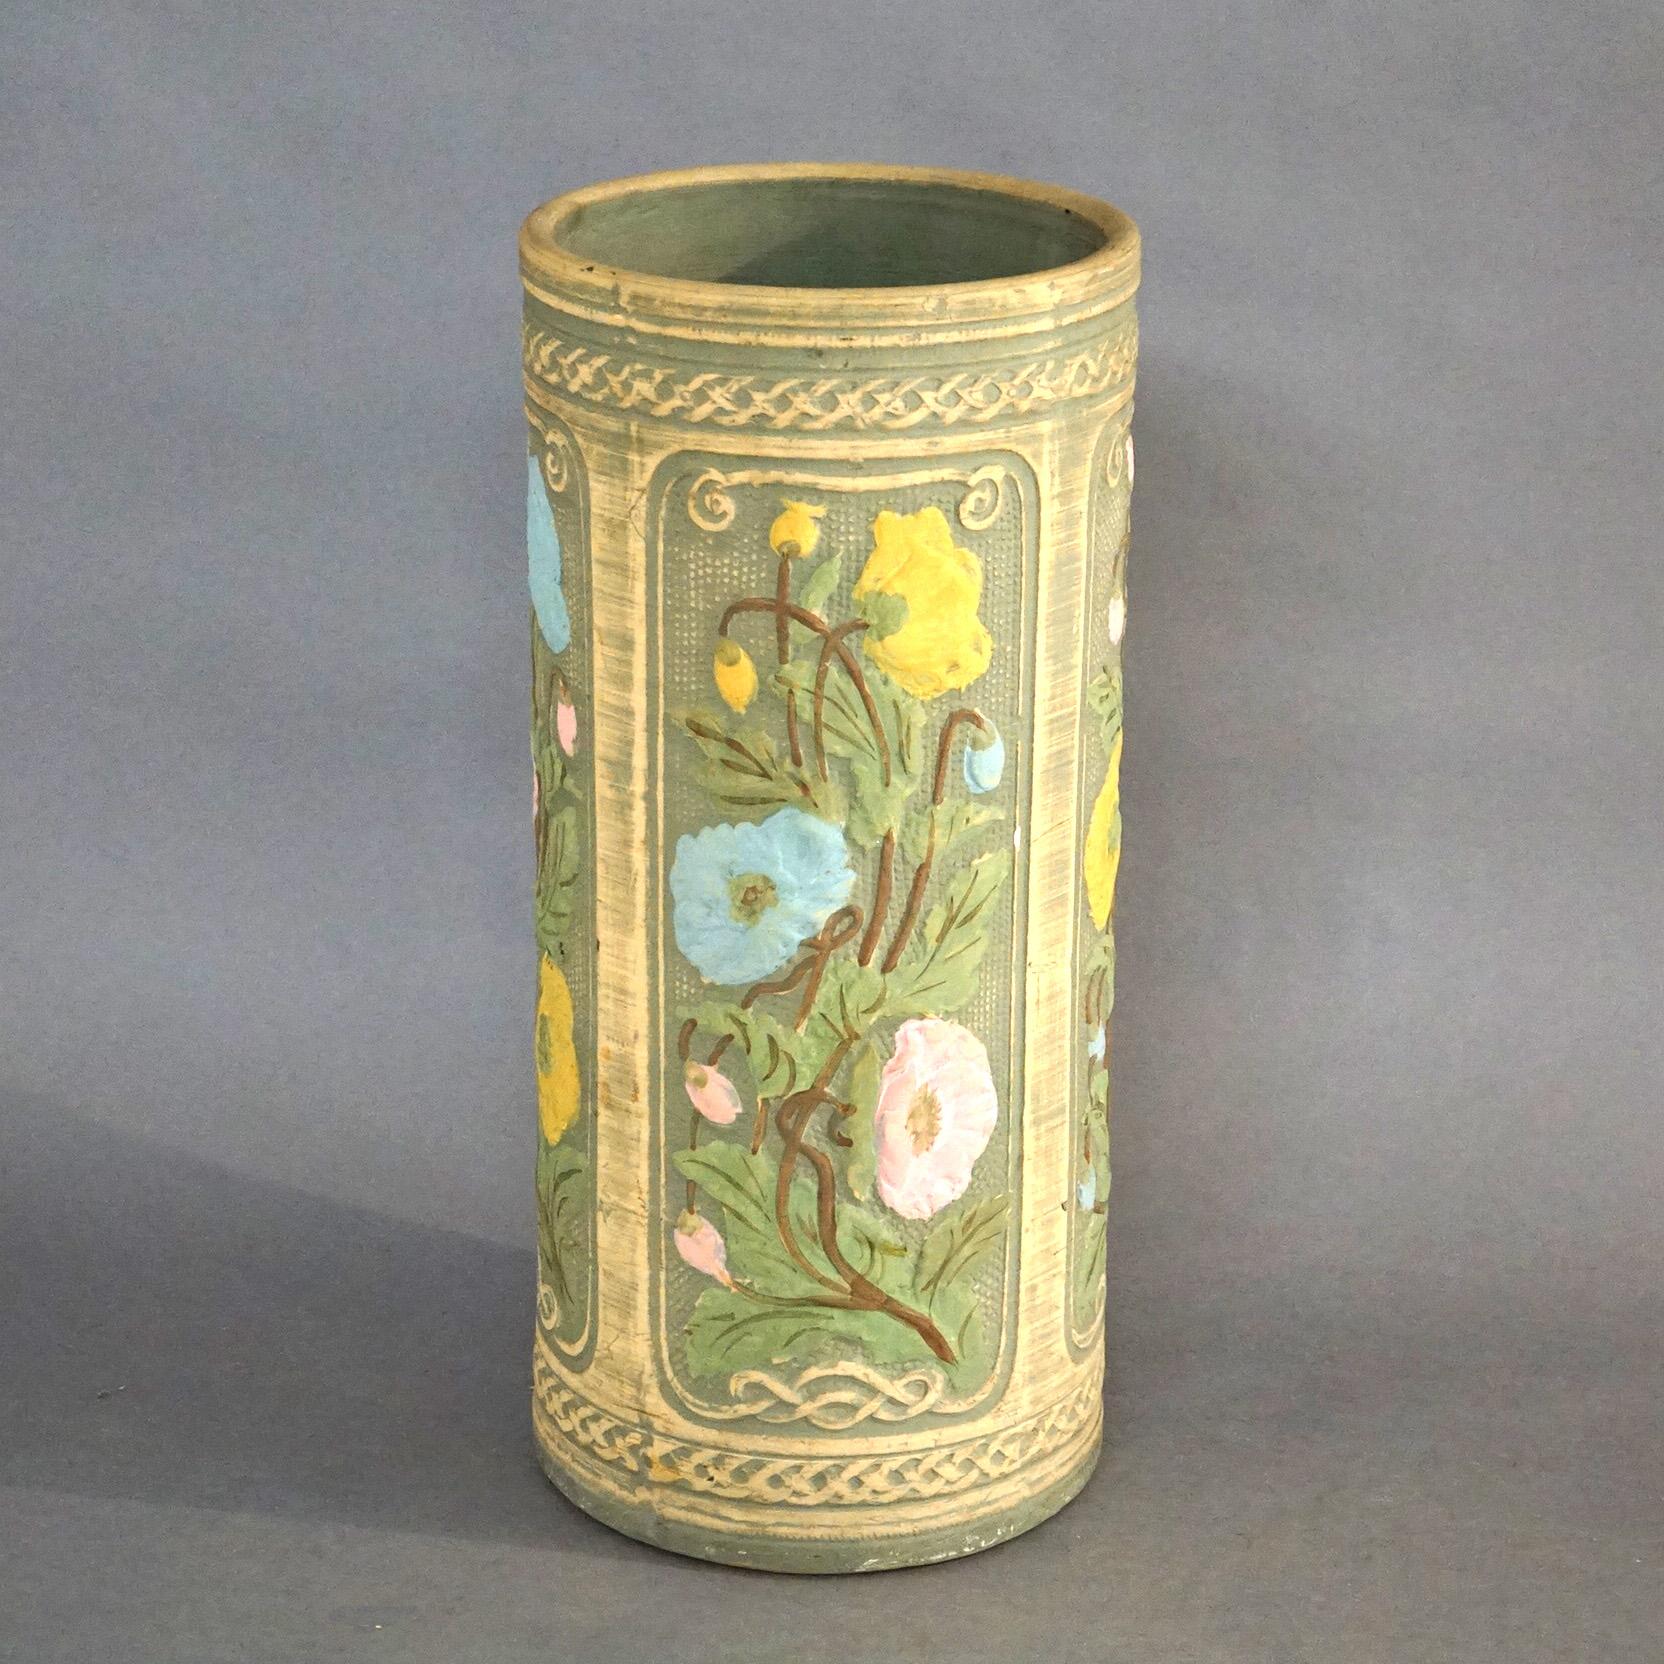 An antique Arts and Crafts Weller Robinson Ransbottom umbrella stand offers art pottery construction in cylindrical form and having panels with poppy flowers, c1920

Measures - 22.25